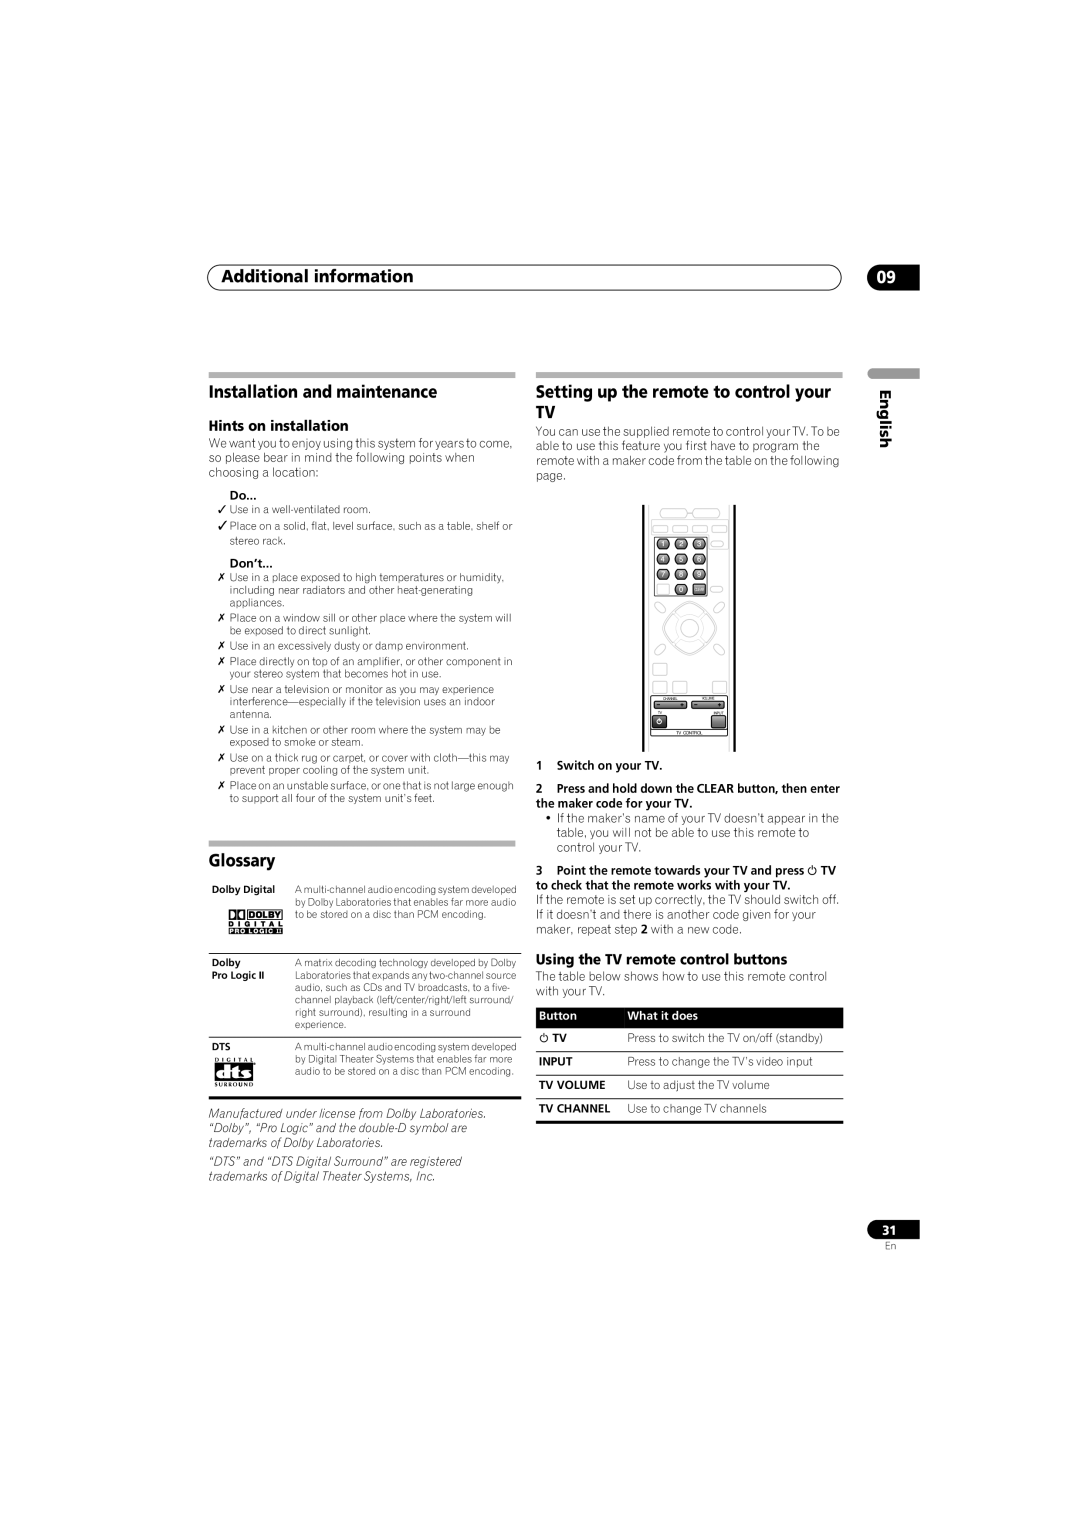 Pioneer SX-SW260 Additional information, Installation and maintenance, Glossary, Setting up the remote to control your TV 